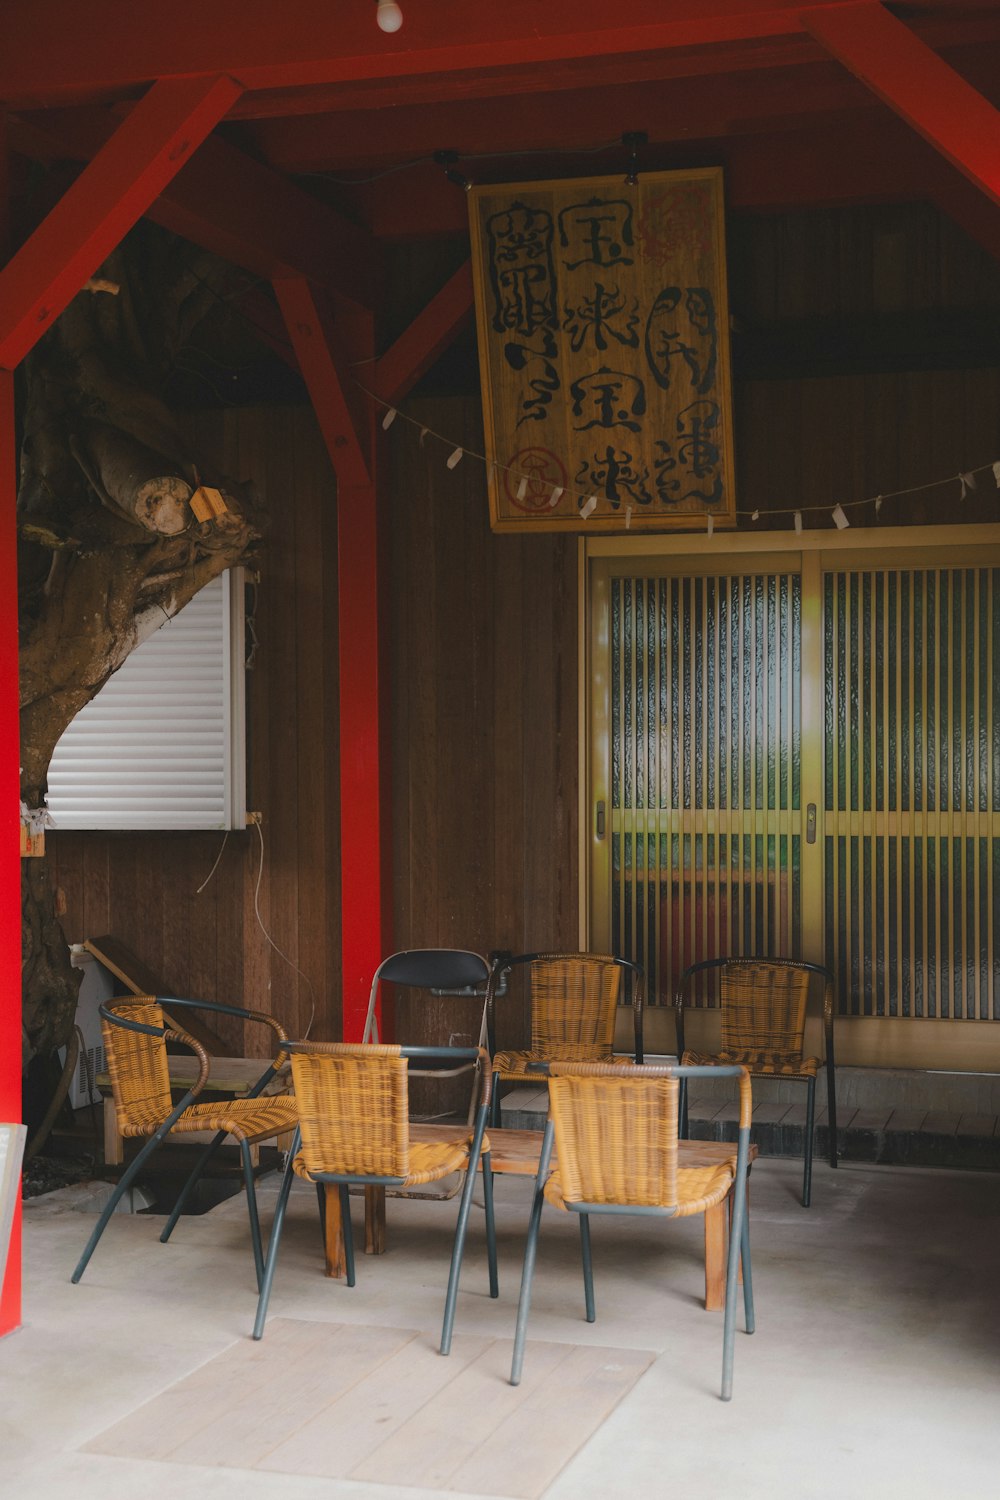 a group of wooden chairs sitting under a red roof